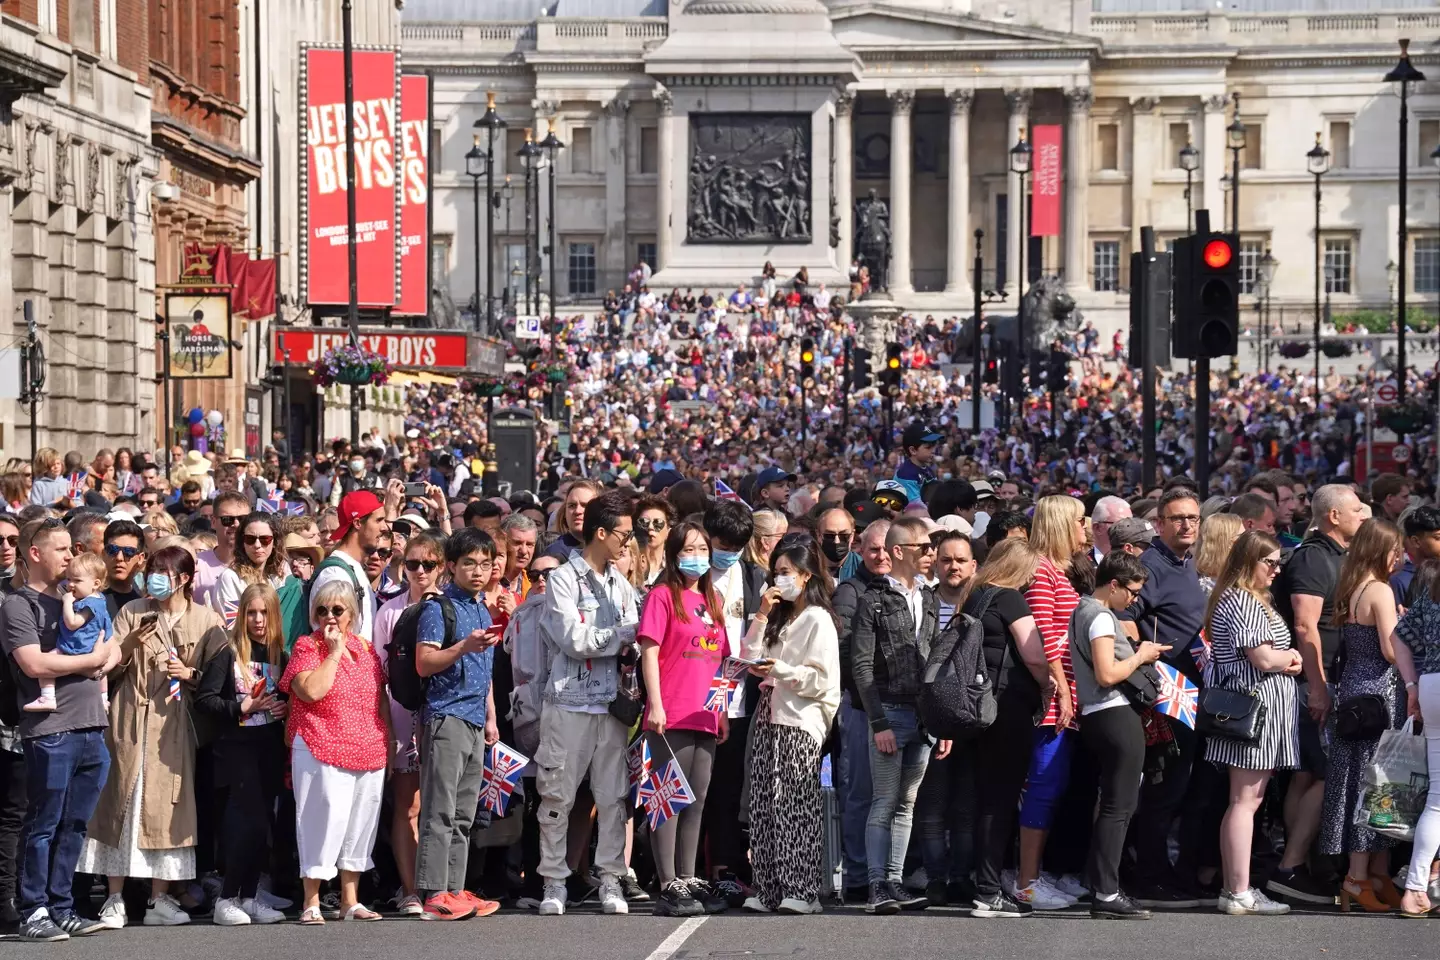 Thousands of people have gathered in London to watch the parade.